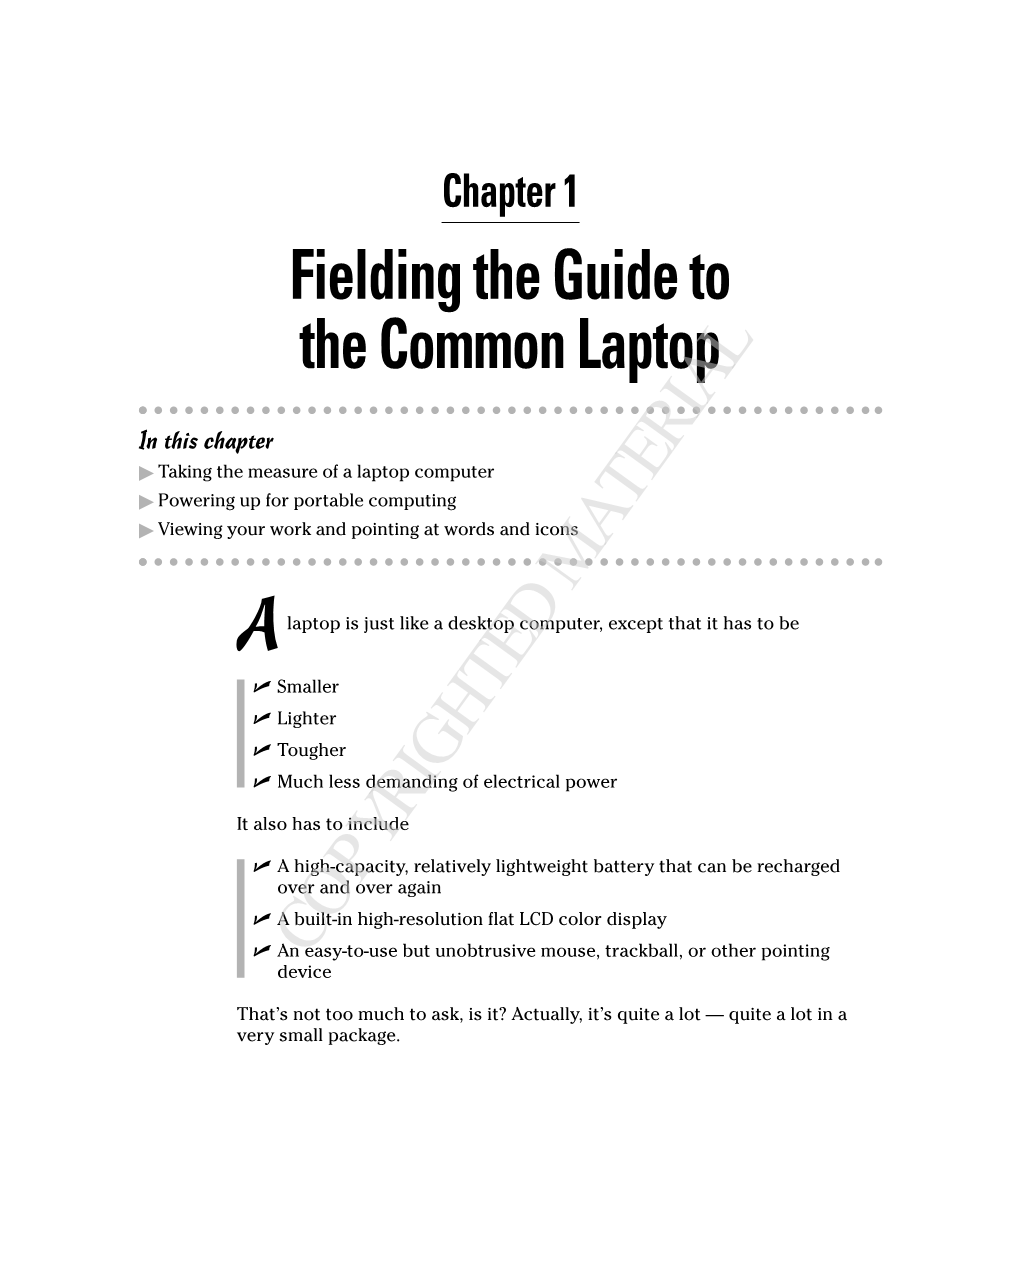 Fielding the Guide to the Common Laptop